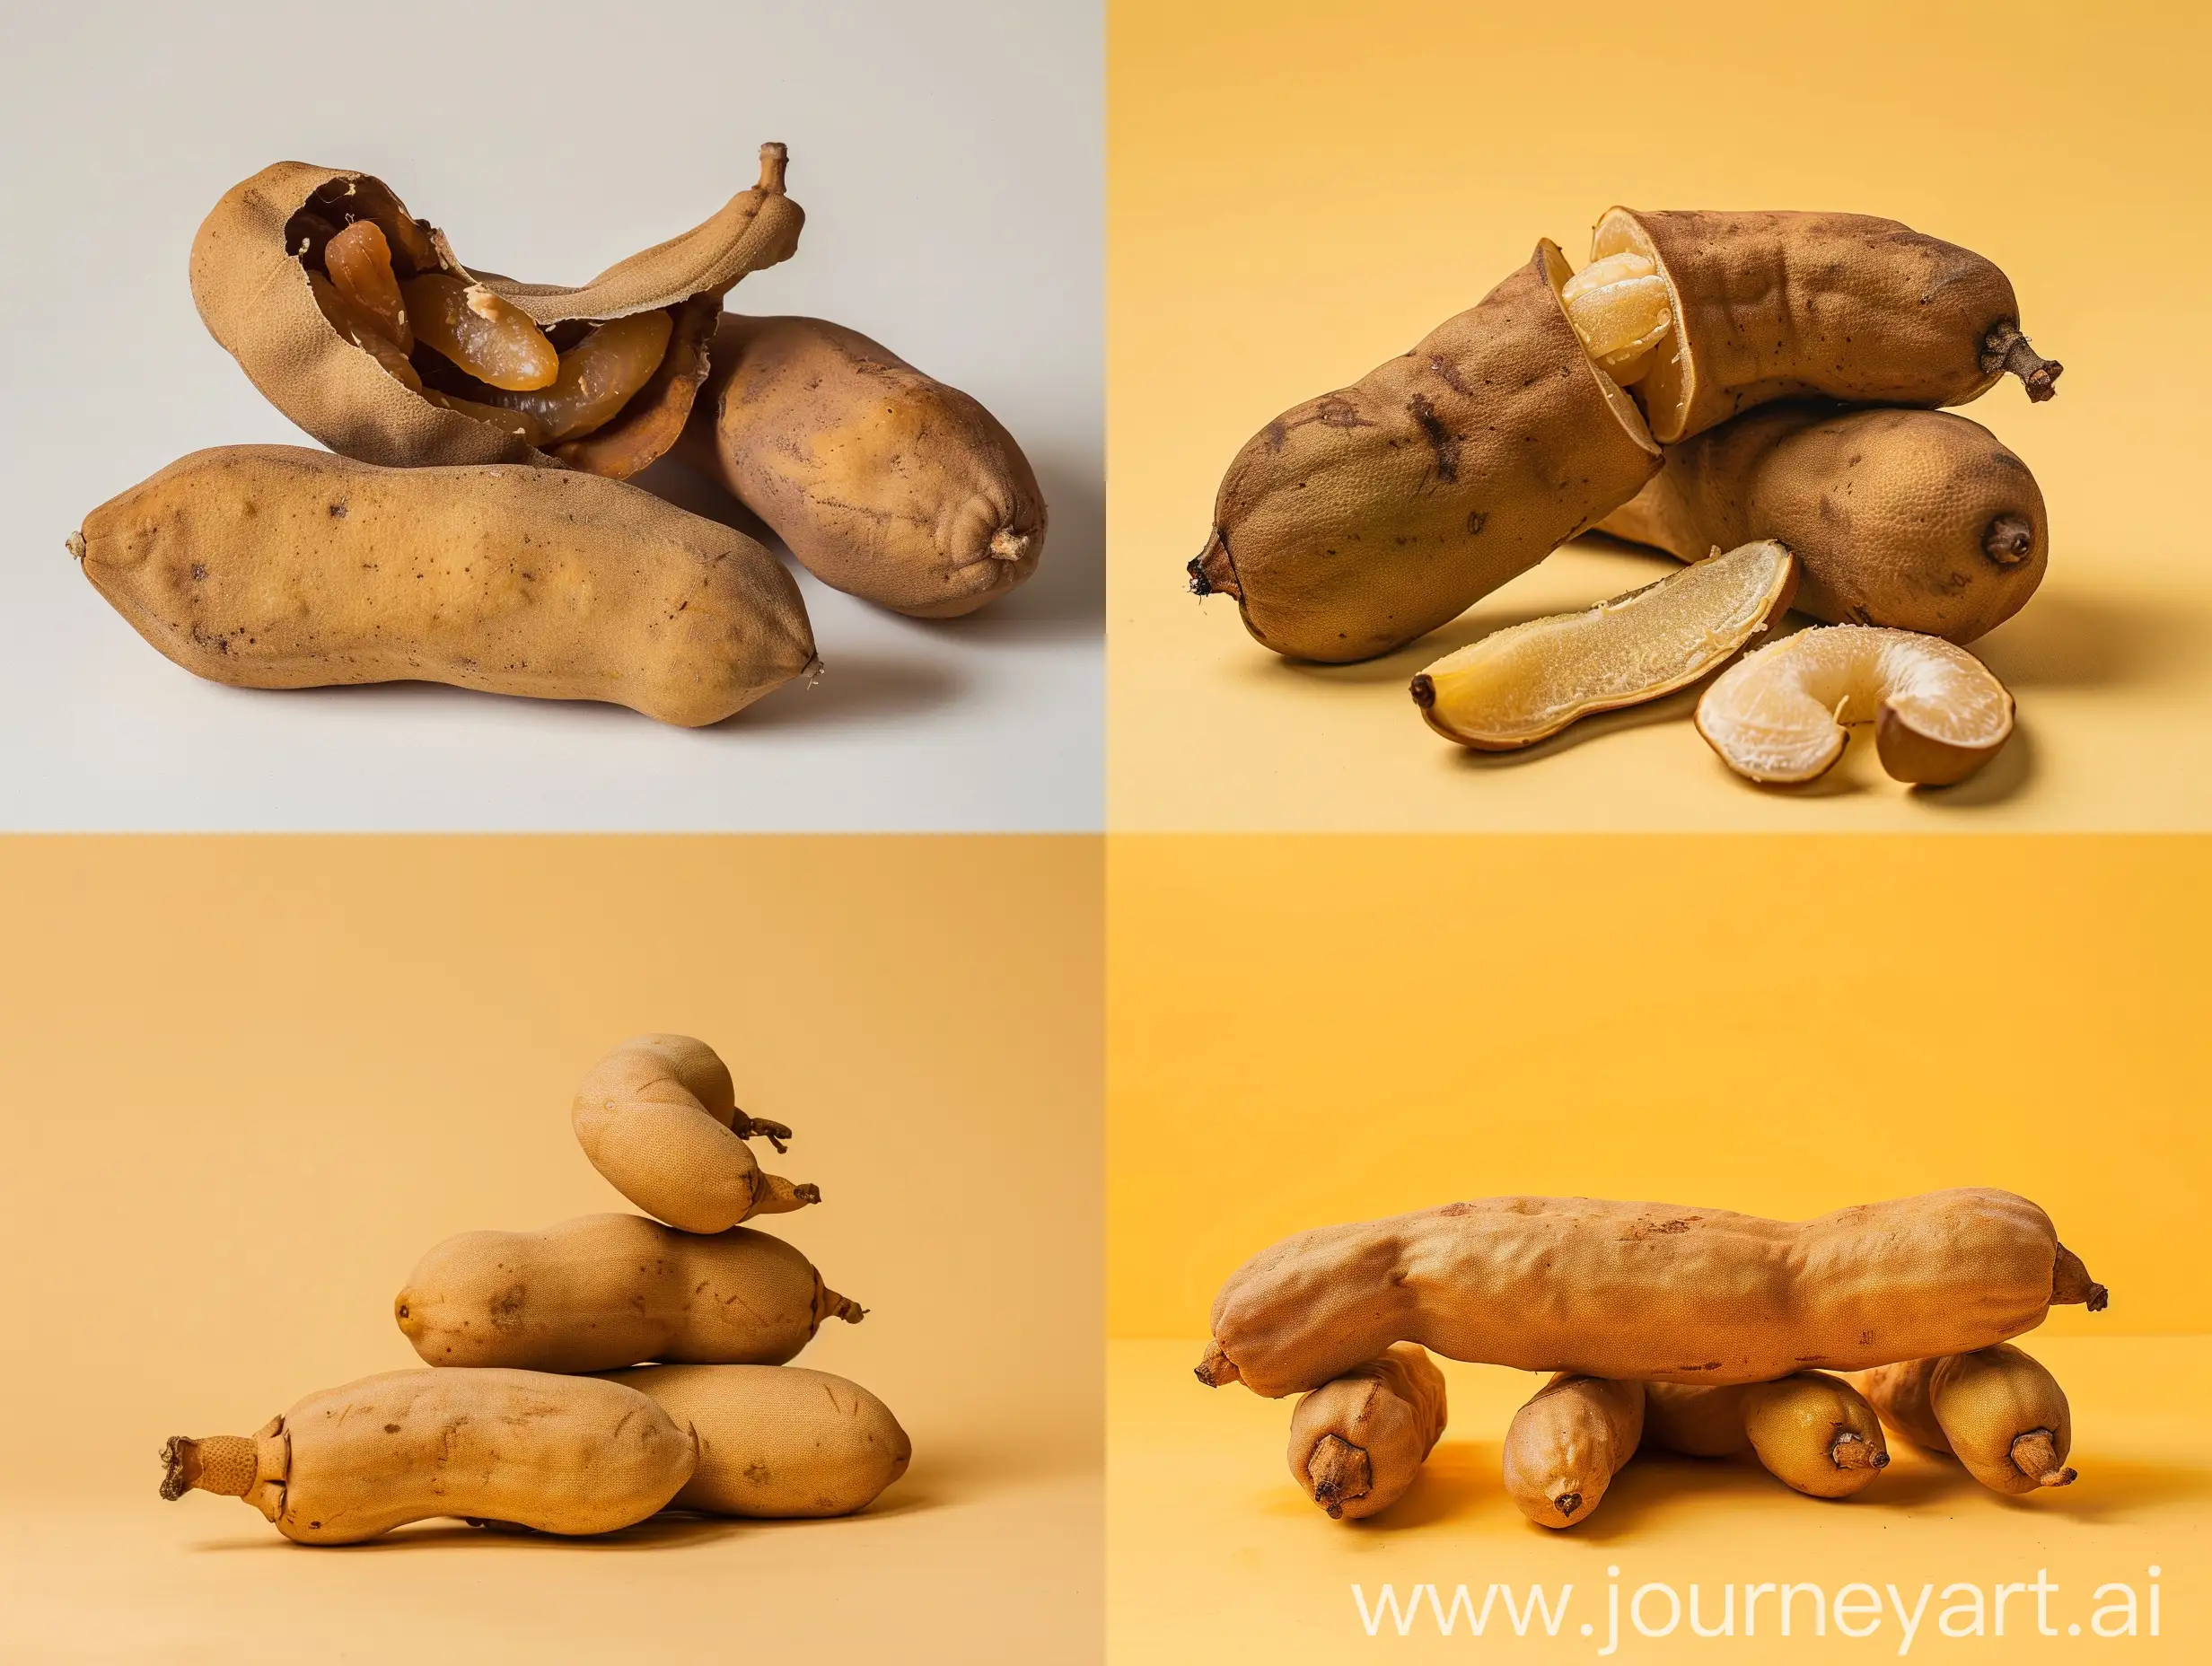 Studio photography with one color background of tamarind